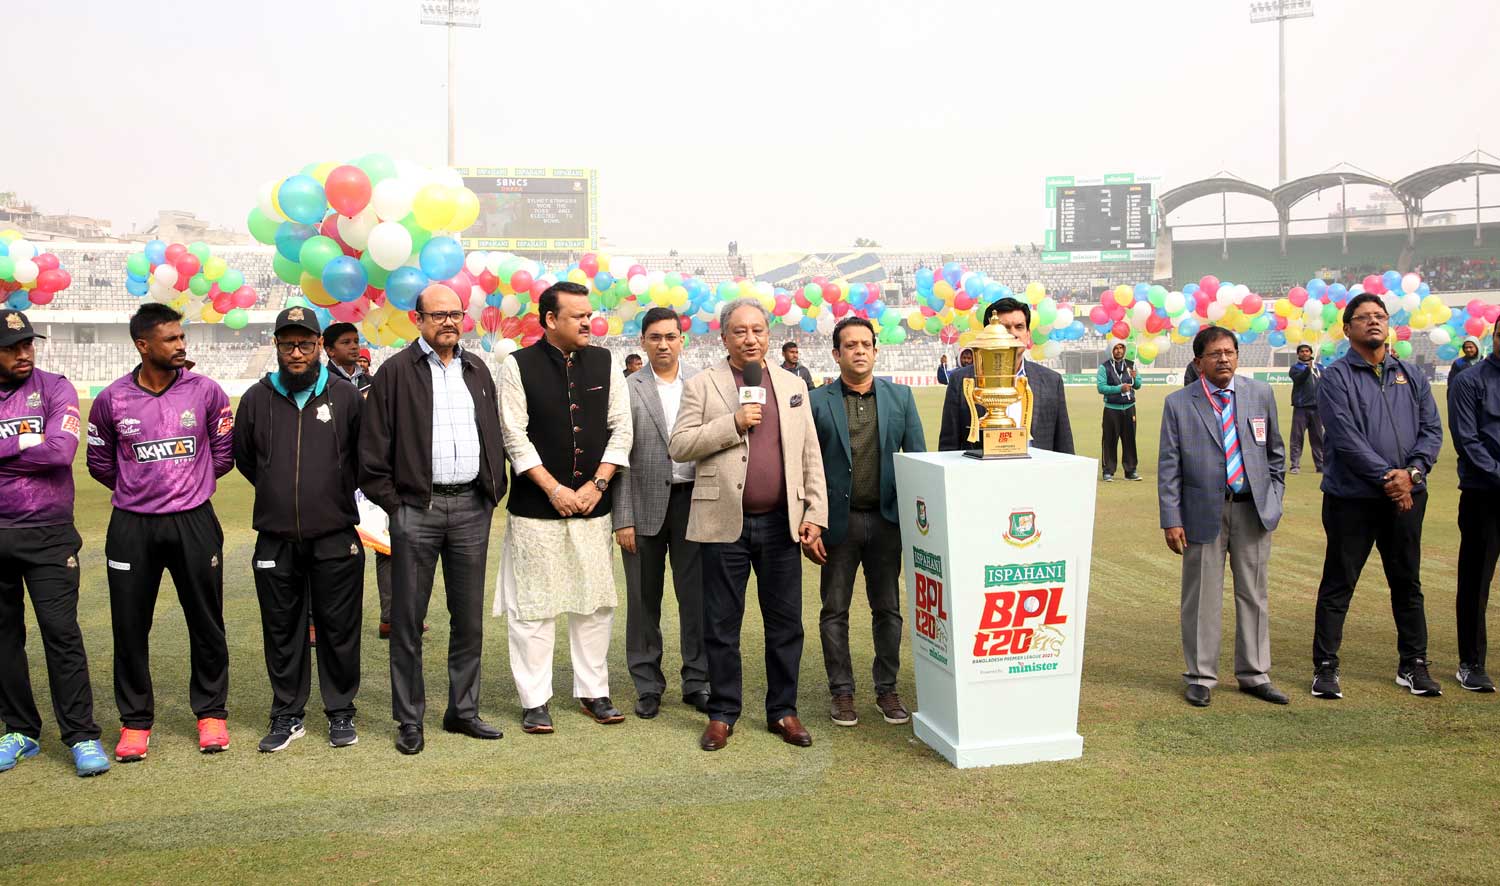 BPL T20-2023 | Inauguration | Match Day 01